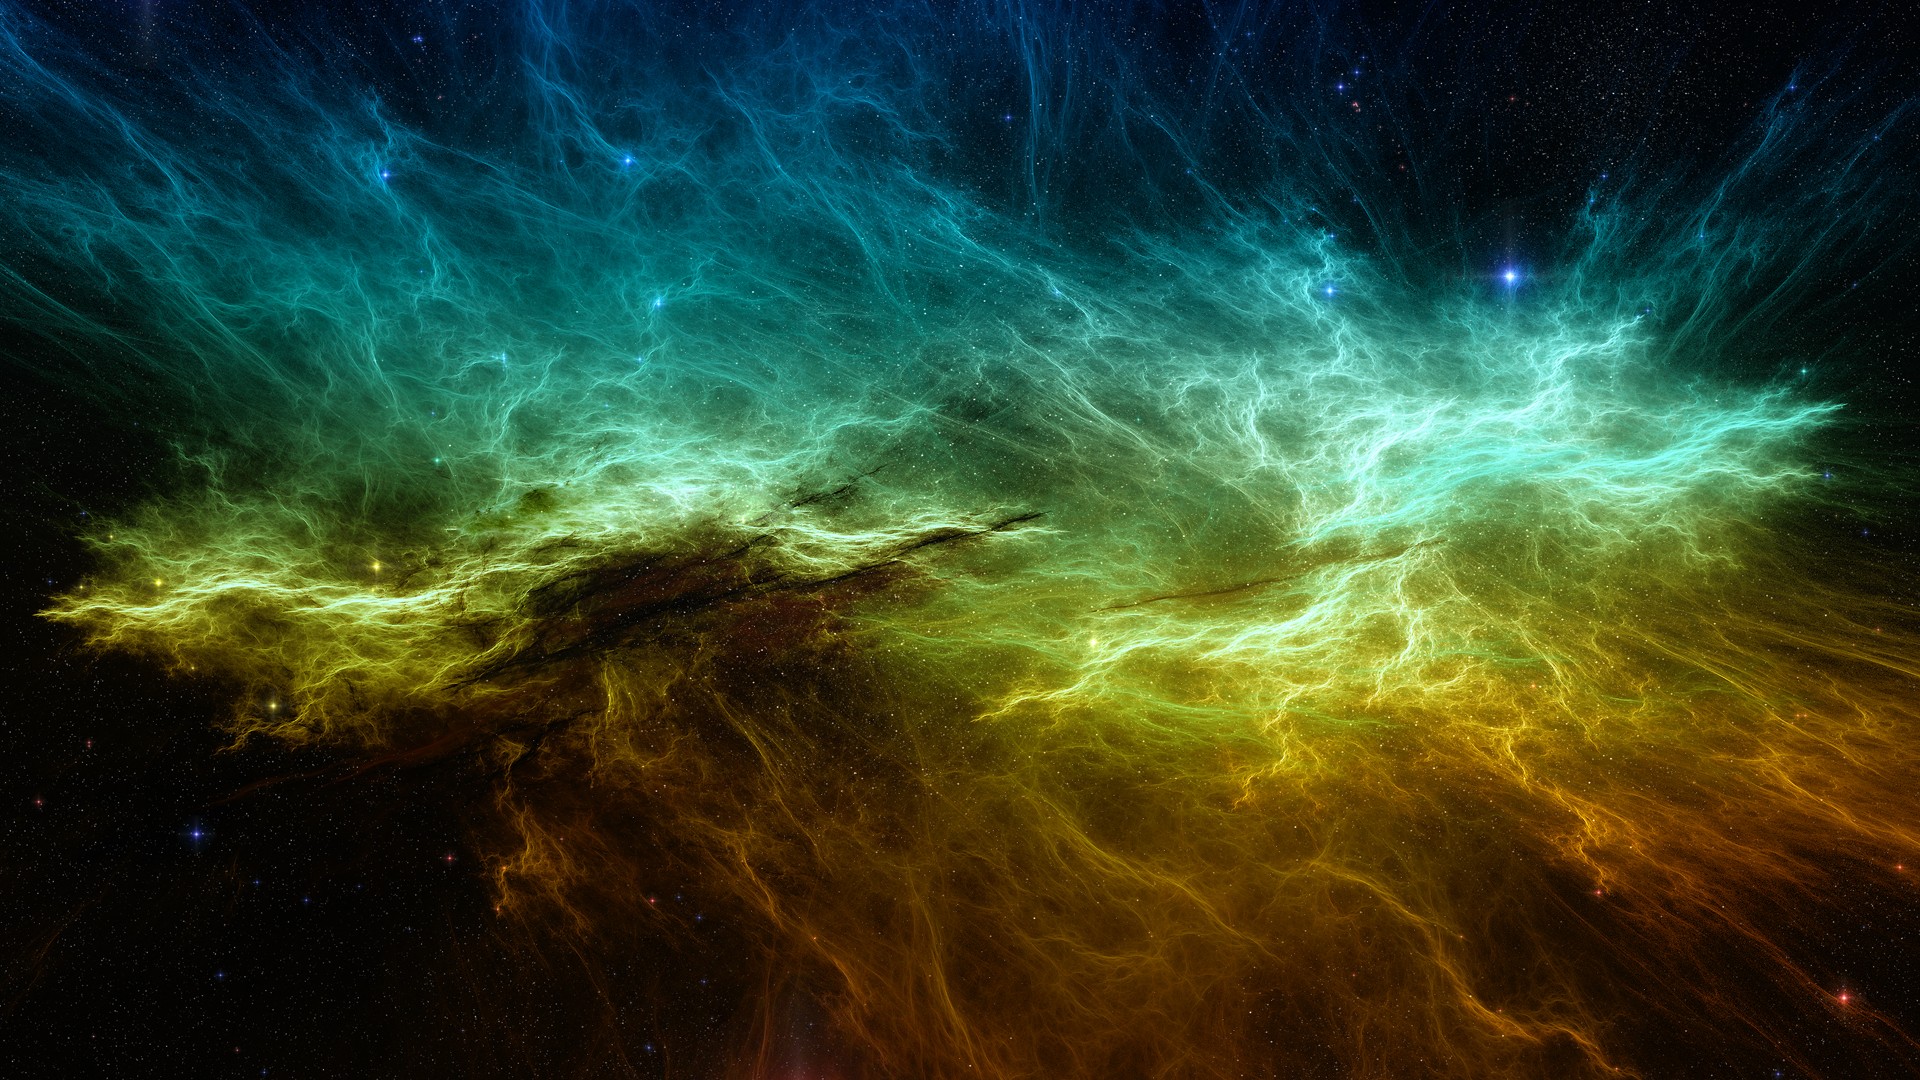  free Get Desktop Abstract Nebula and make this wallpaper for your